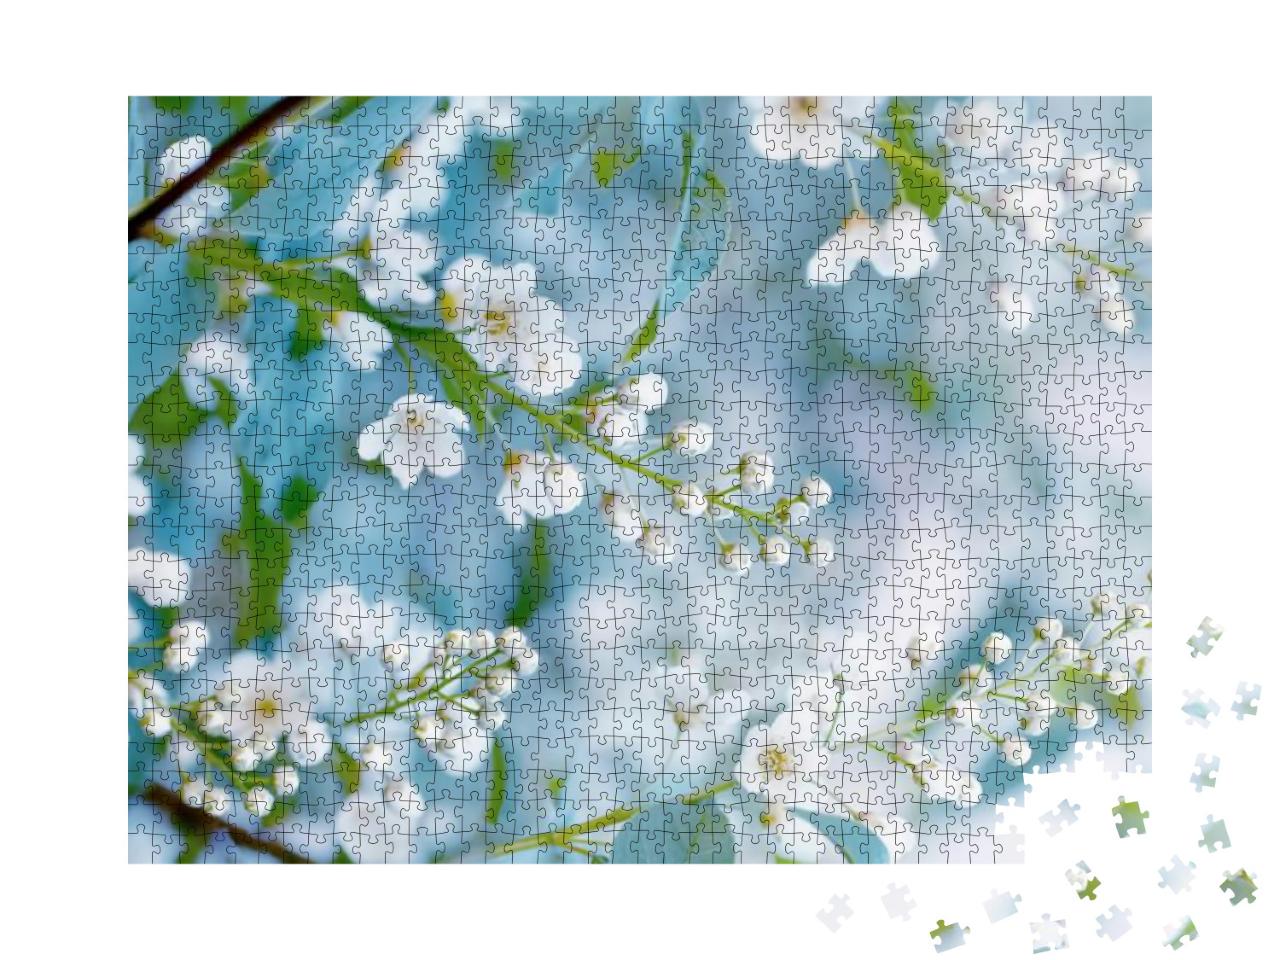 Floral Spring Background, Soft Focus. Branches of Blossom... Jigsaw Puzzle with 1000 pieces